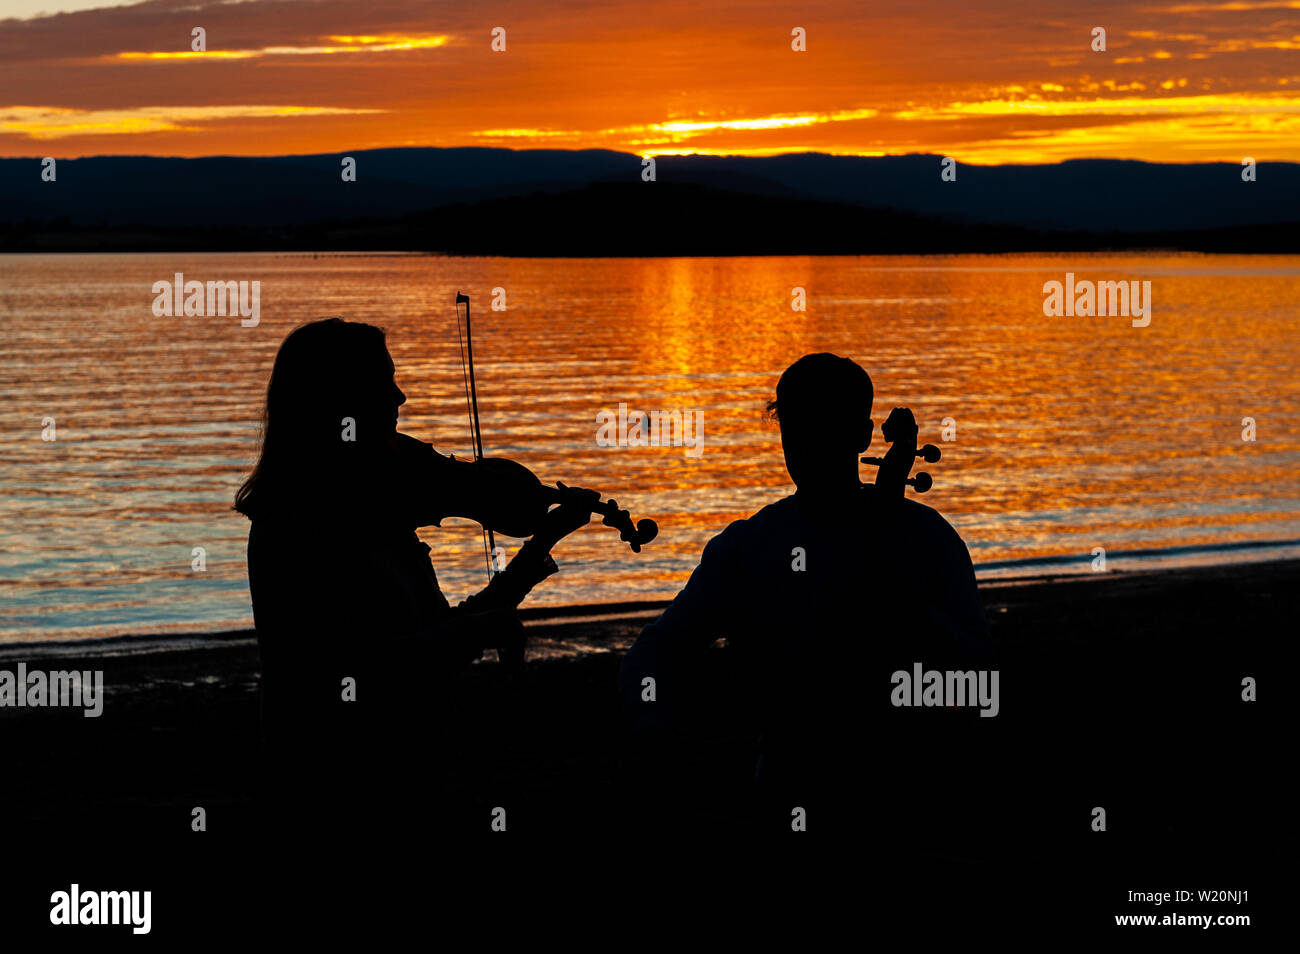 Bantry, West Cork, Ireland. 4th July, 2019. Bantry is hosting the West Cork Chamber Music Festival this week, which brings classical musicians from far and wide to play at the various concerts in the town. Violin player Kate Fleming and cellist Callum Owens, both from Cork, played as the sun went down this evening. Credit: Andy Gibson/Alamy Live News. Stock Photo